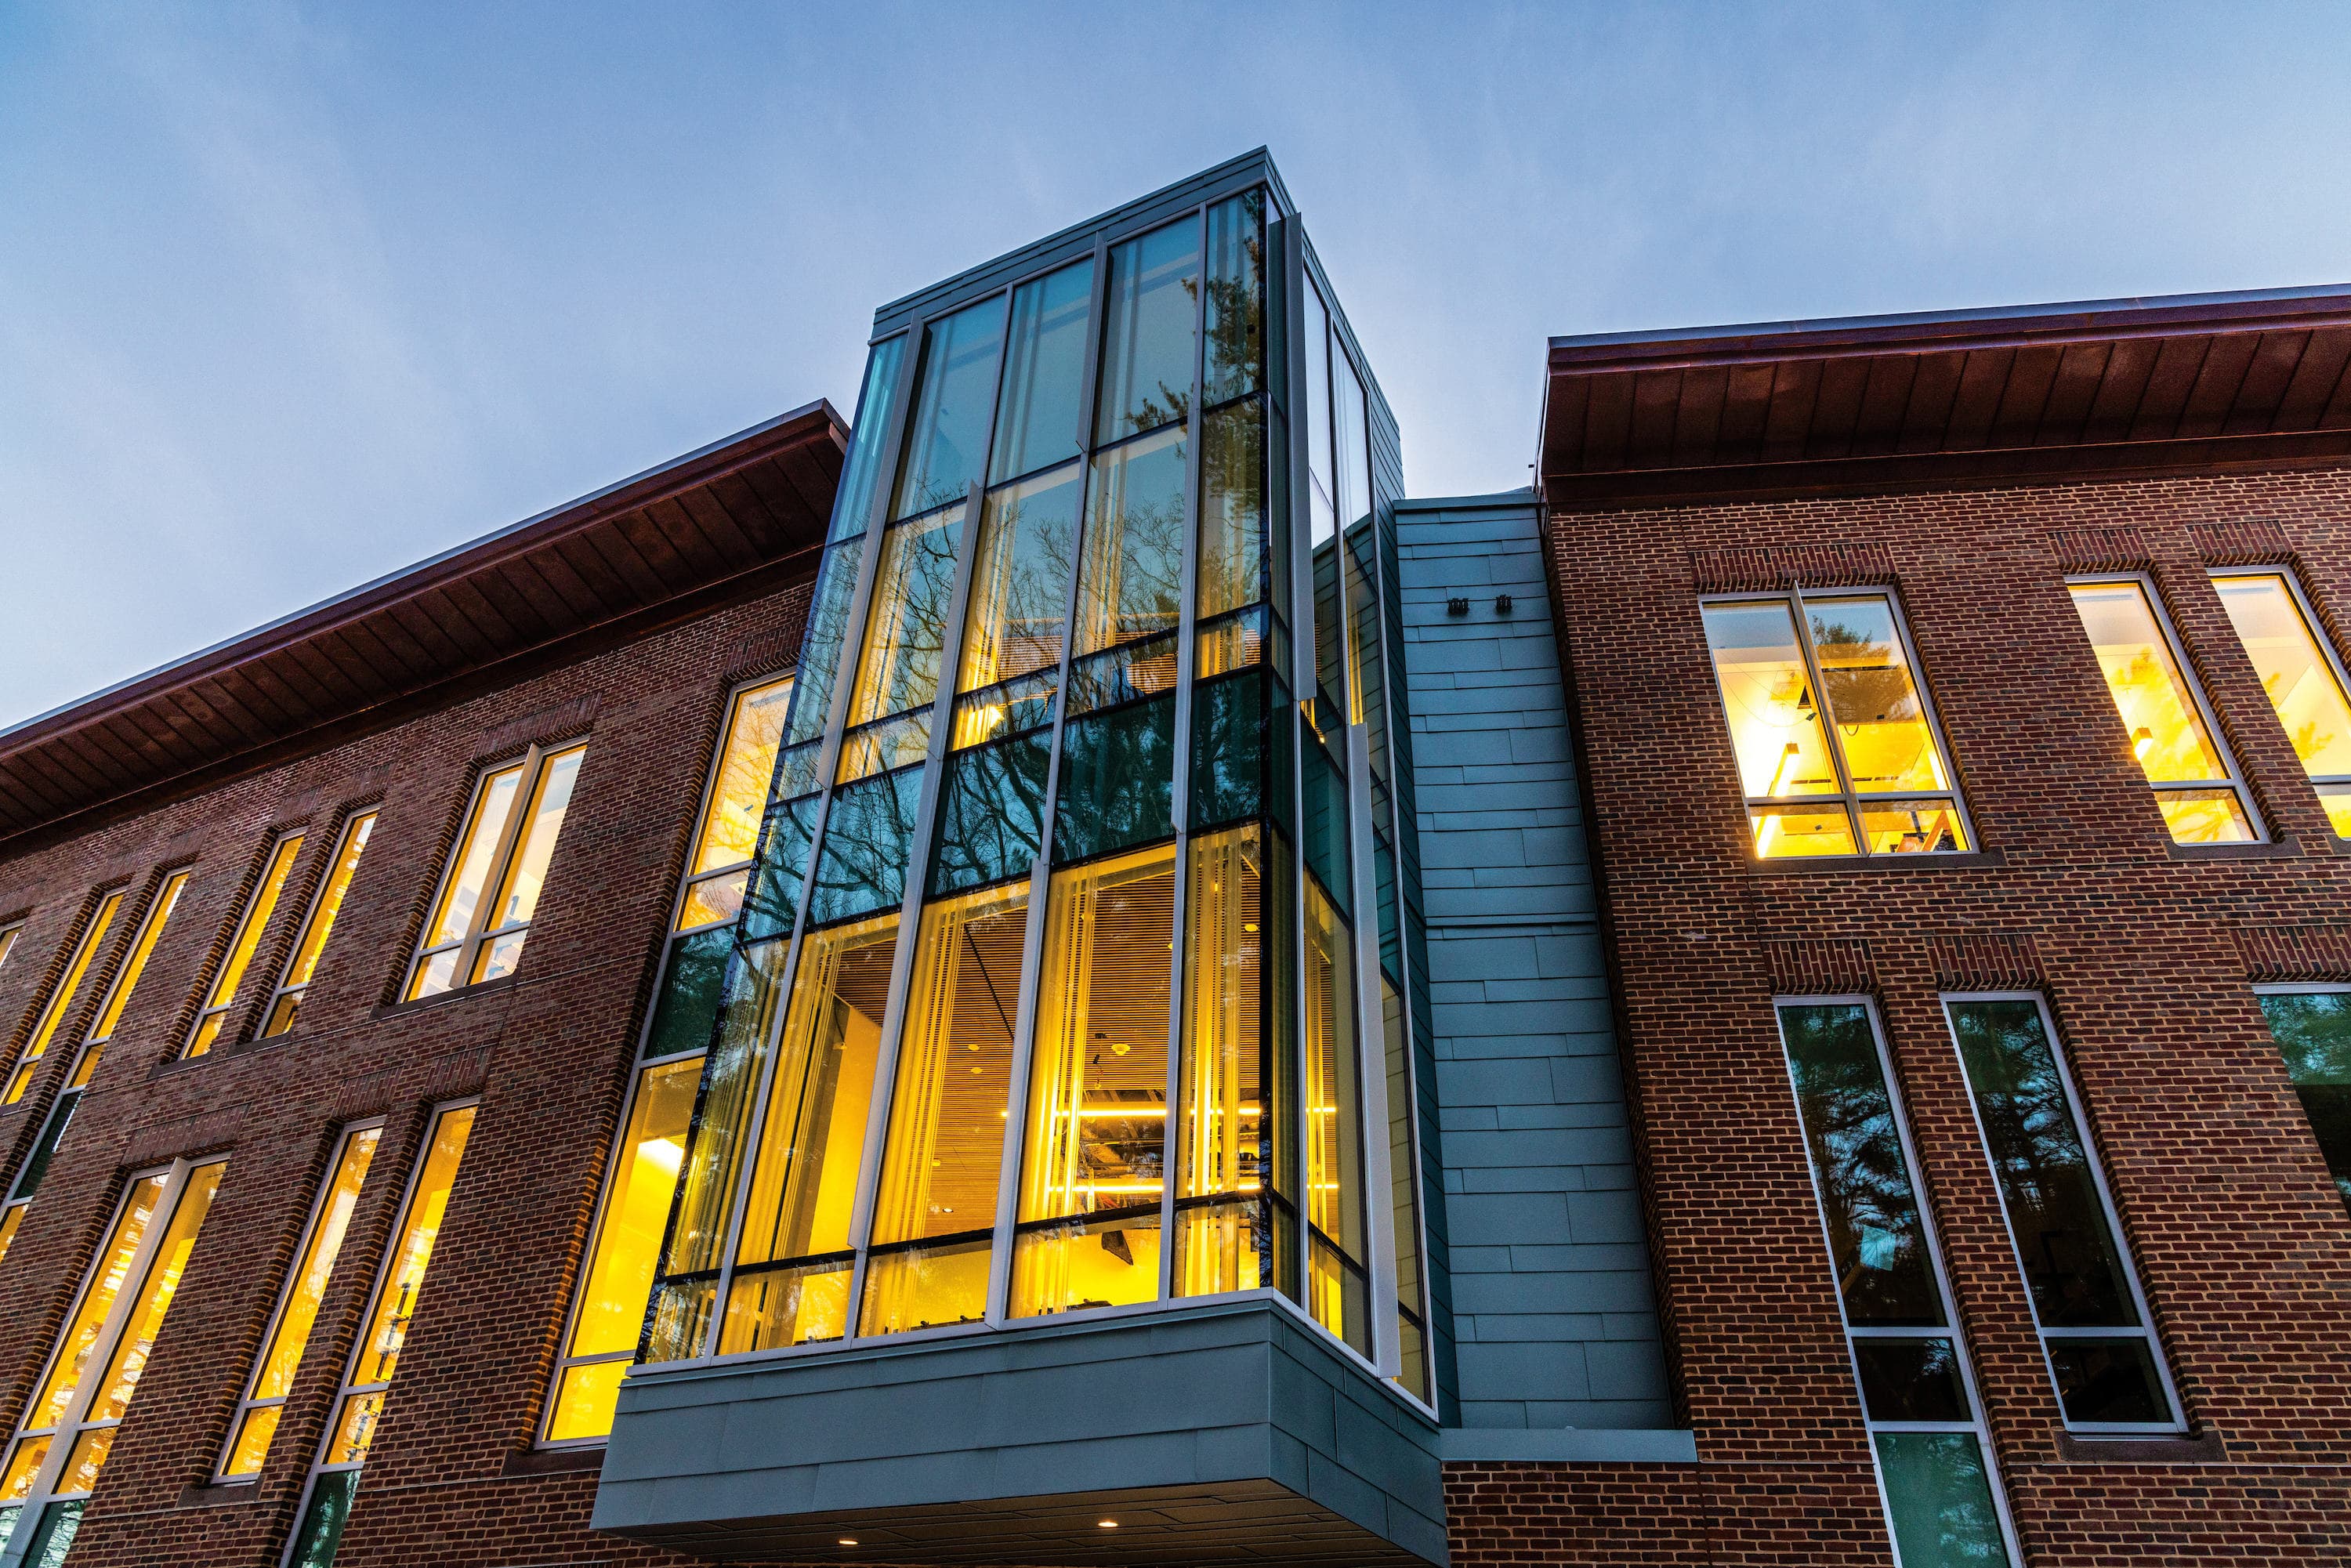 Warm light illuminates the windows from the inside of the Class of 1982 Engineering and Computer Science Center at dusk.